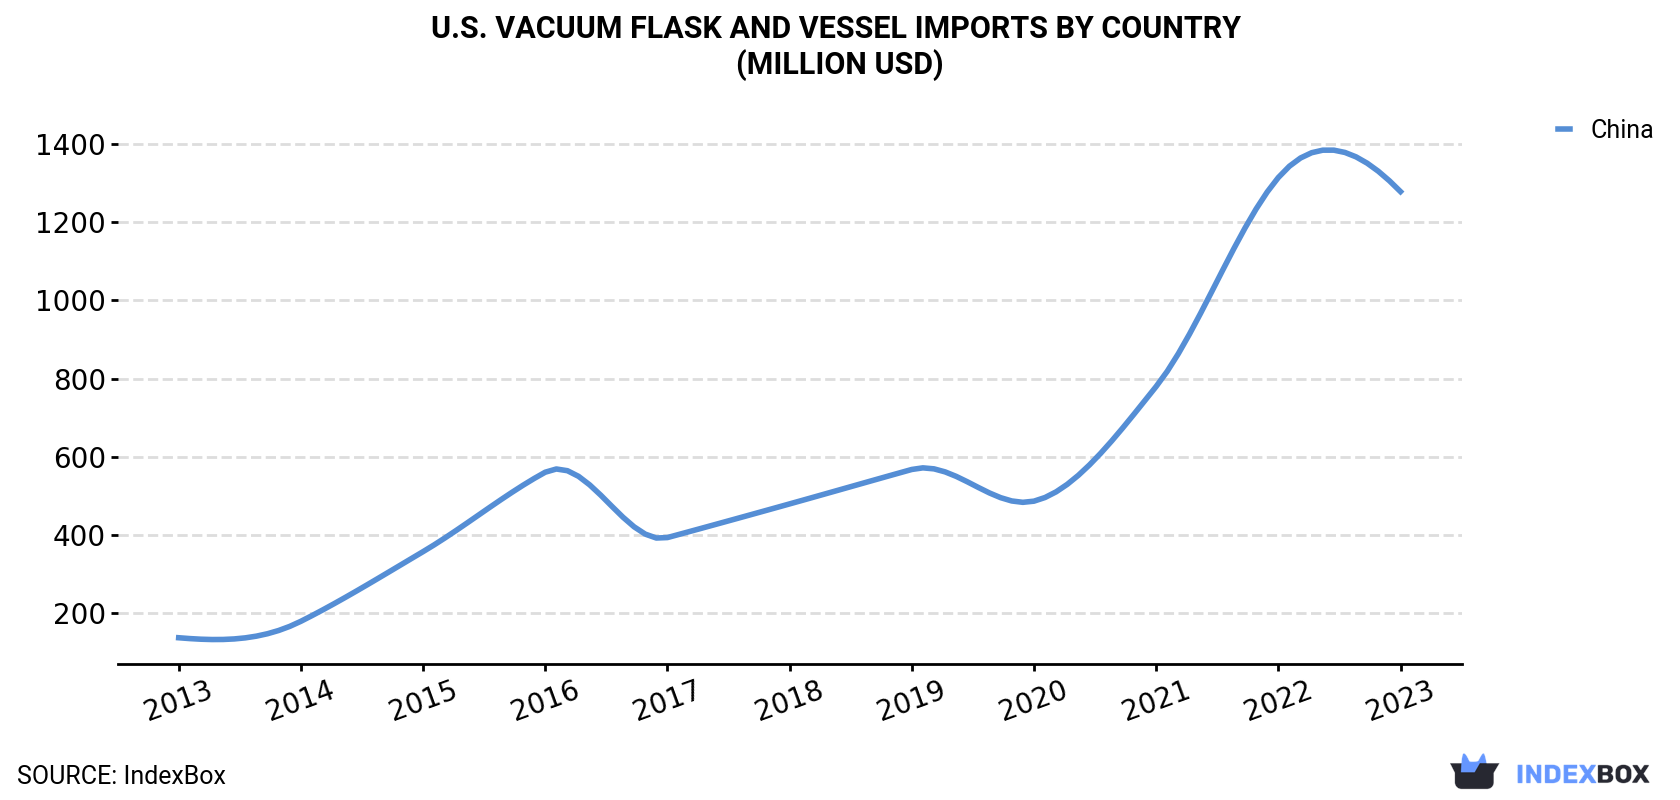 U.S. Vacuum Flask and Vessel Imports By Country (Million USD)